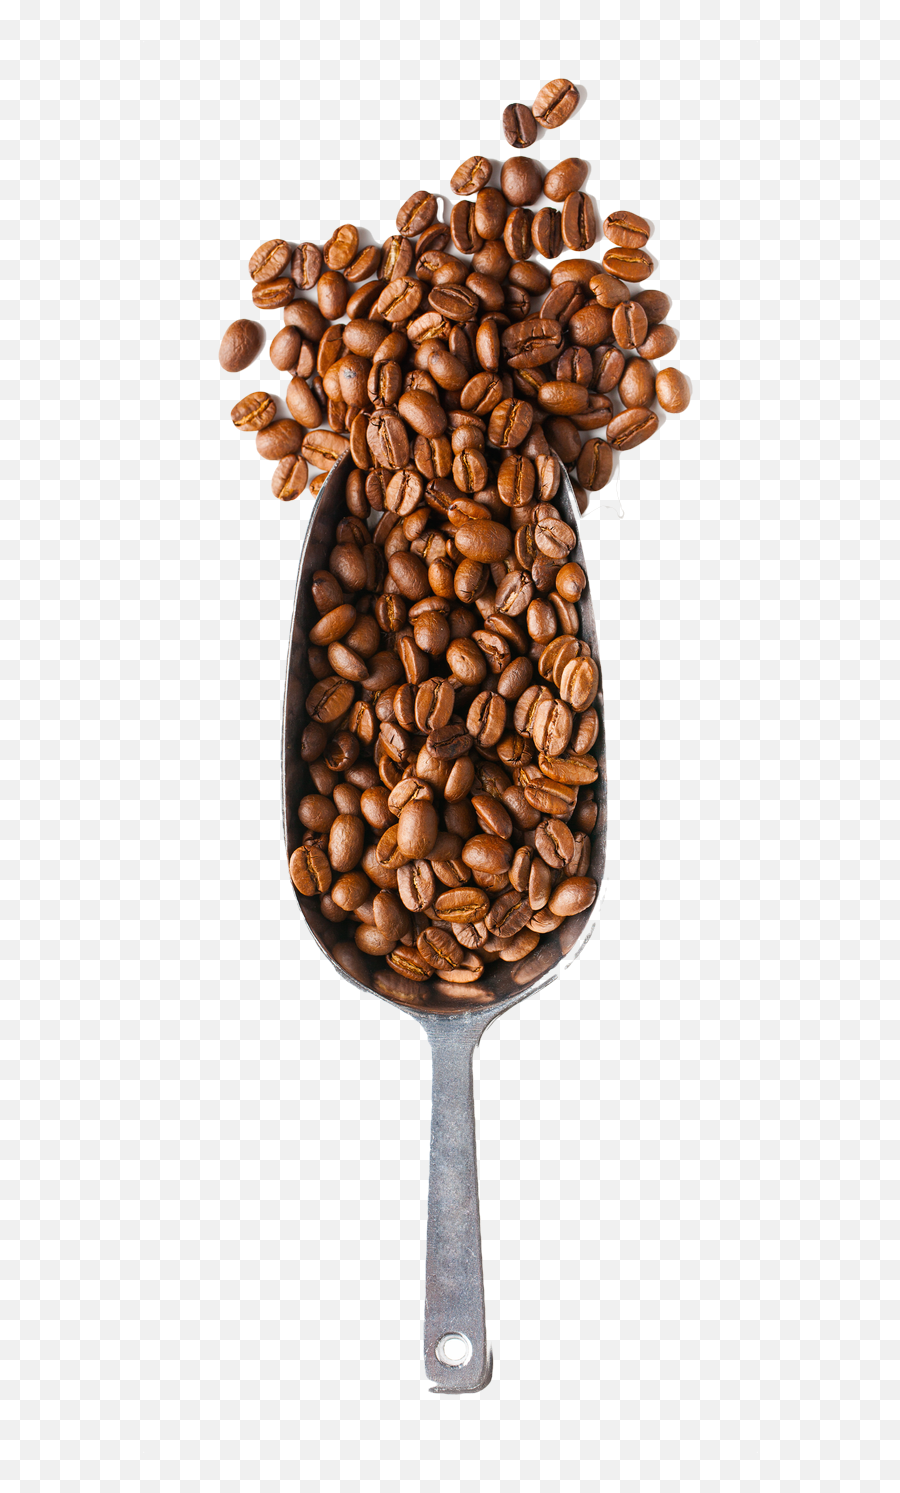 Download Coffee Time - Coffee Beans And Spoon Png Png Image Coffee Beans Spoon Png,Coffee Bean Vector Png